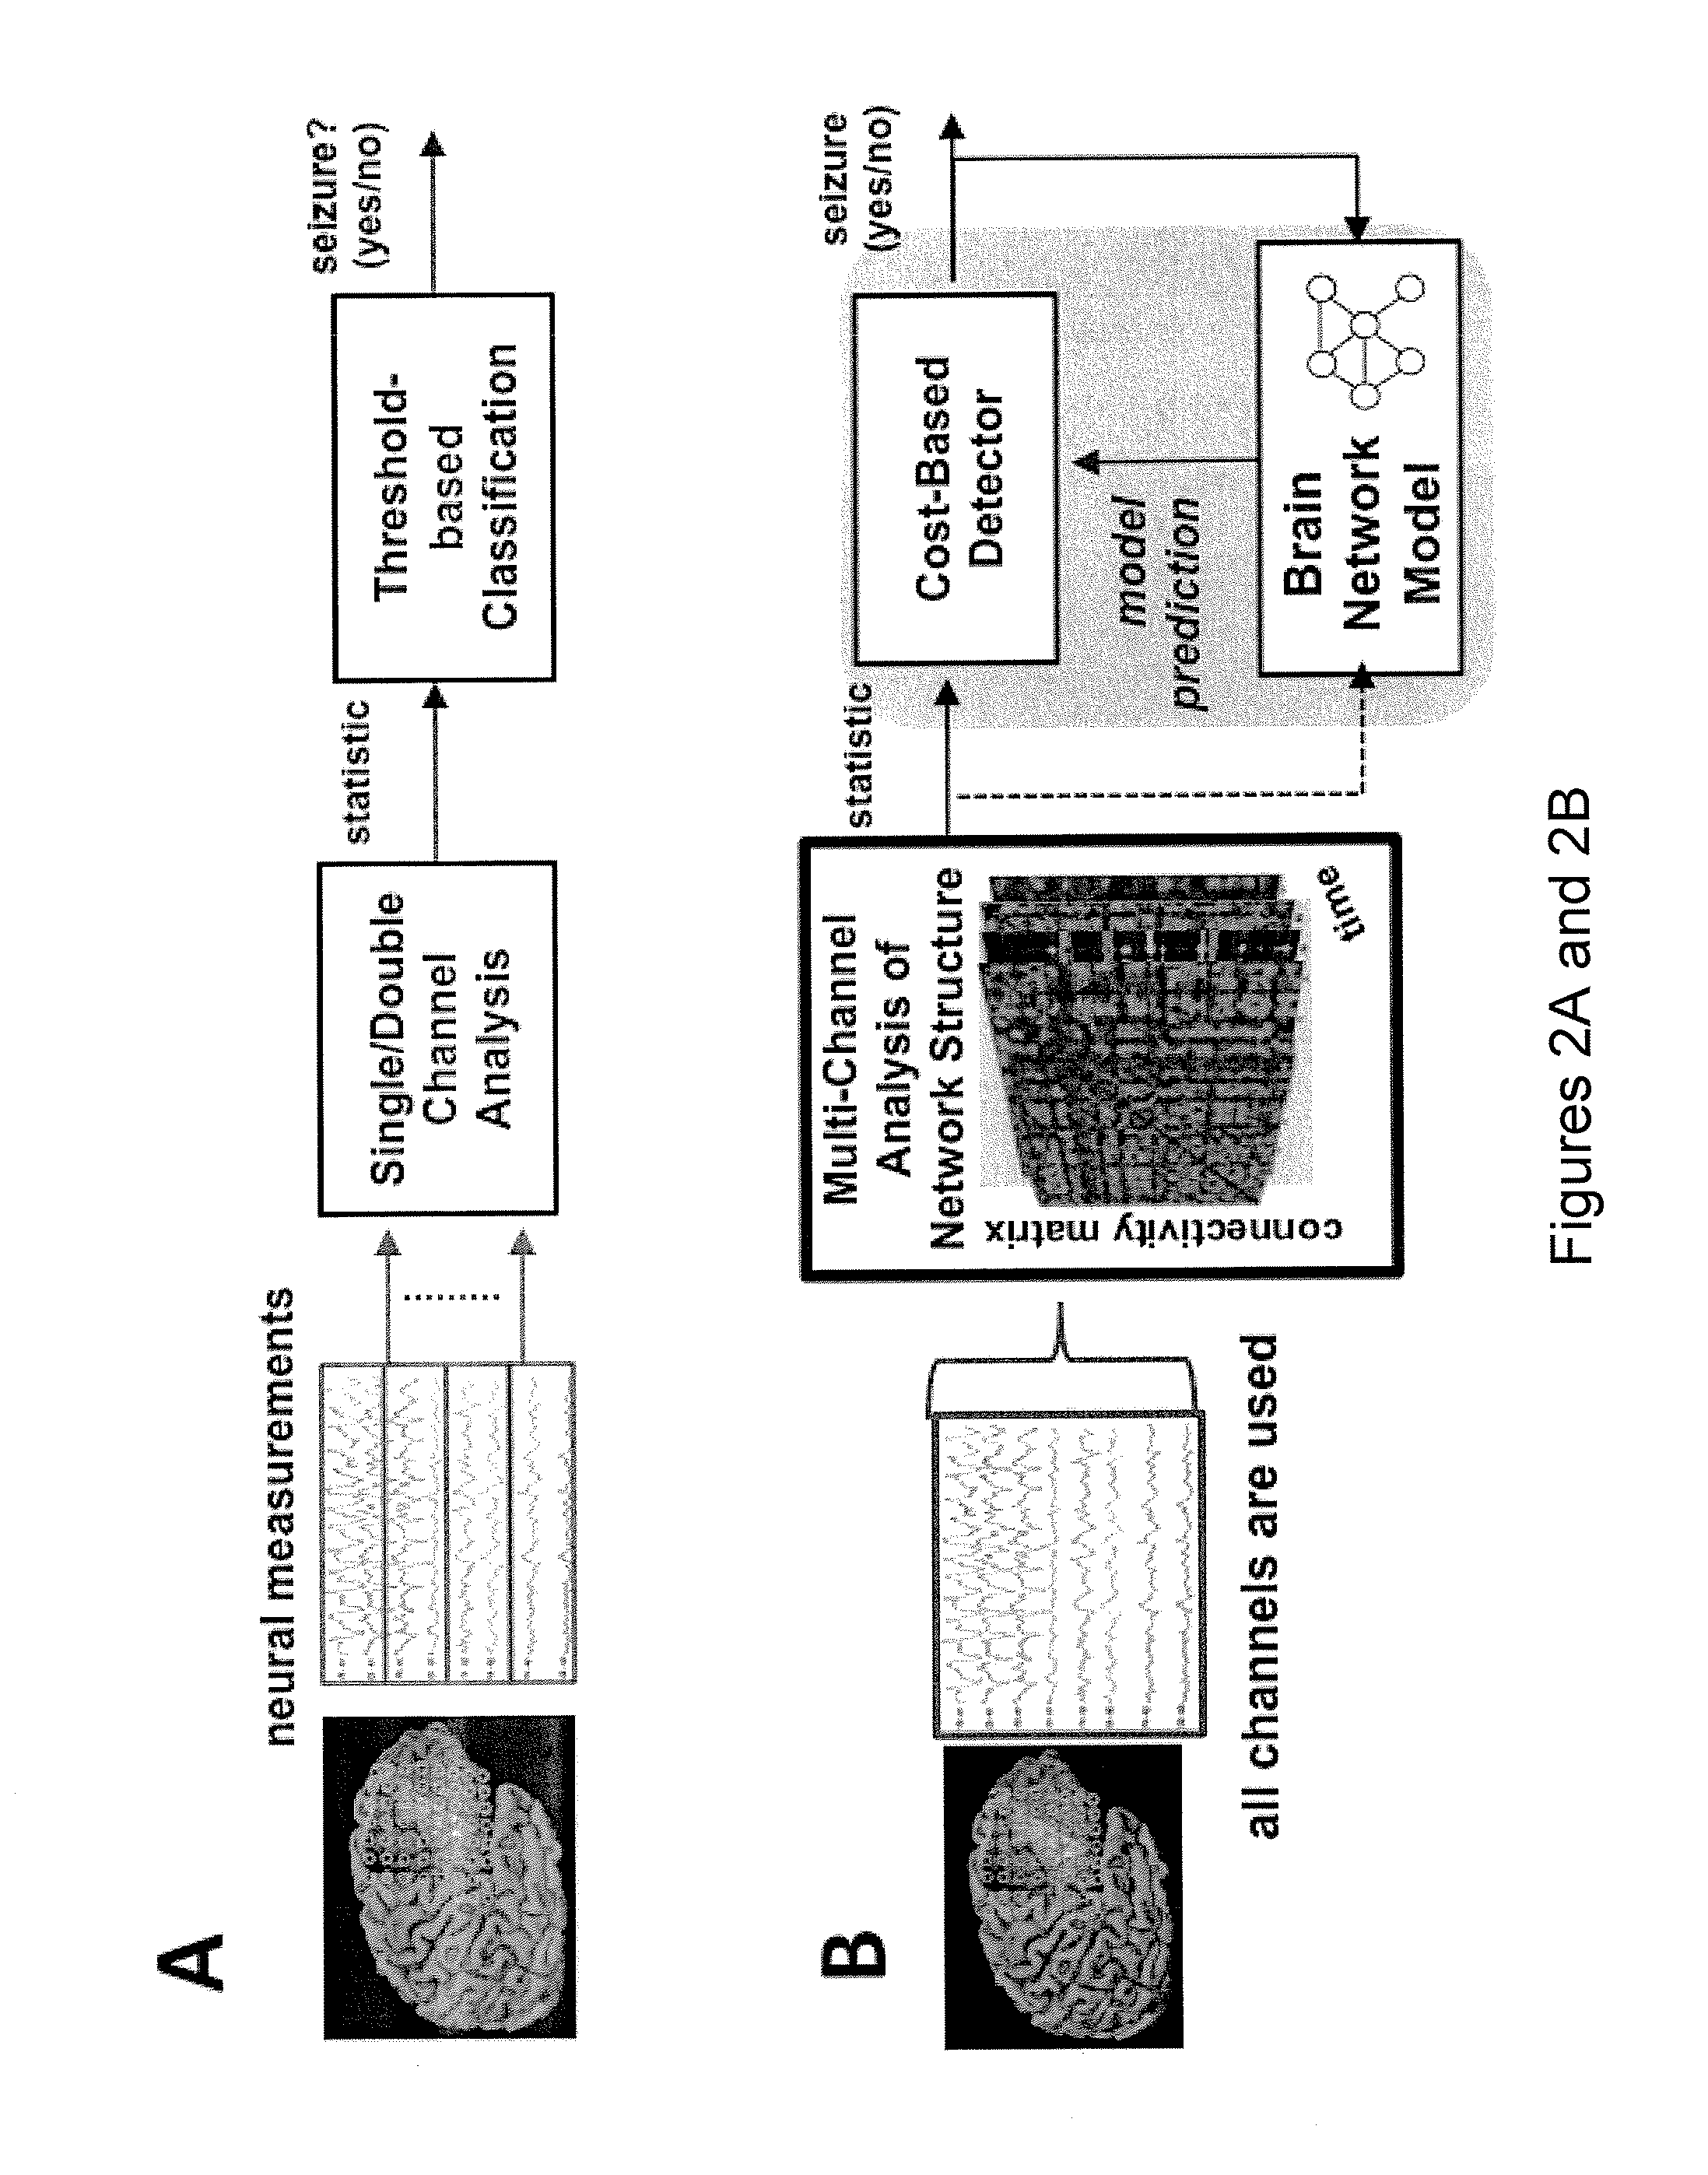 Seizure detection device and systems